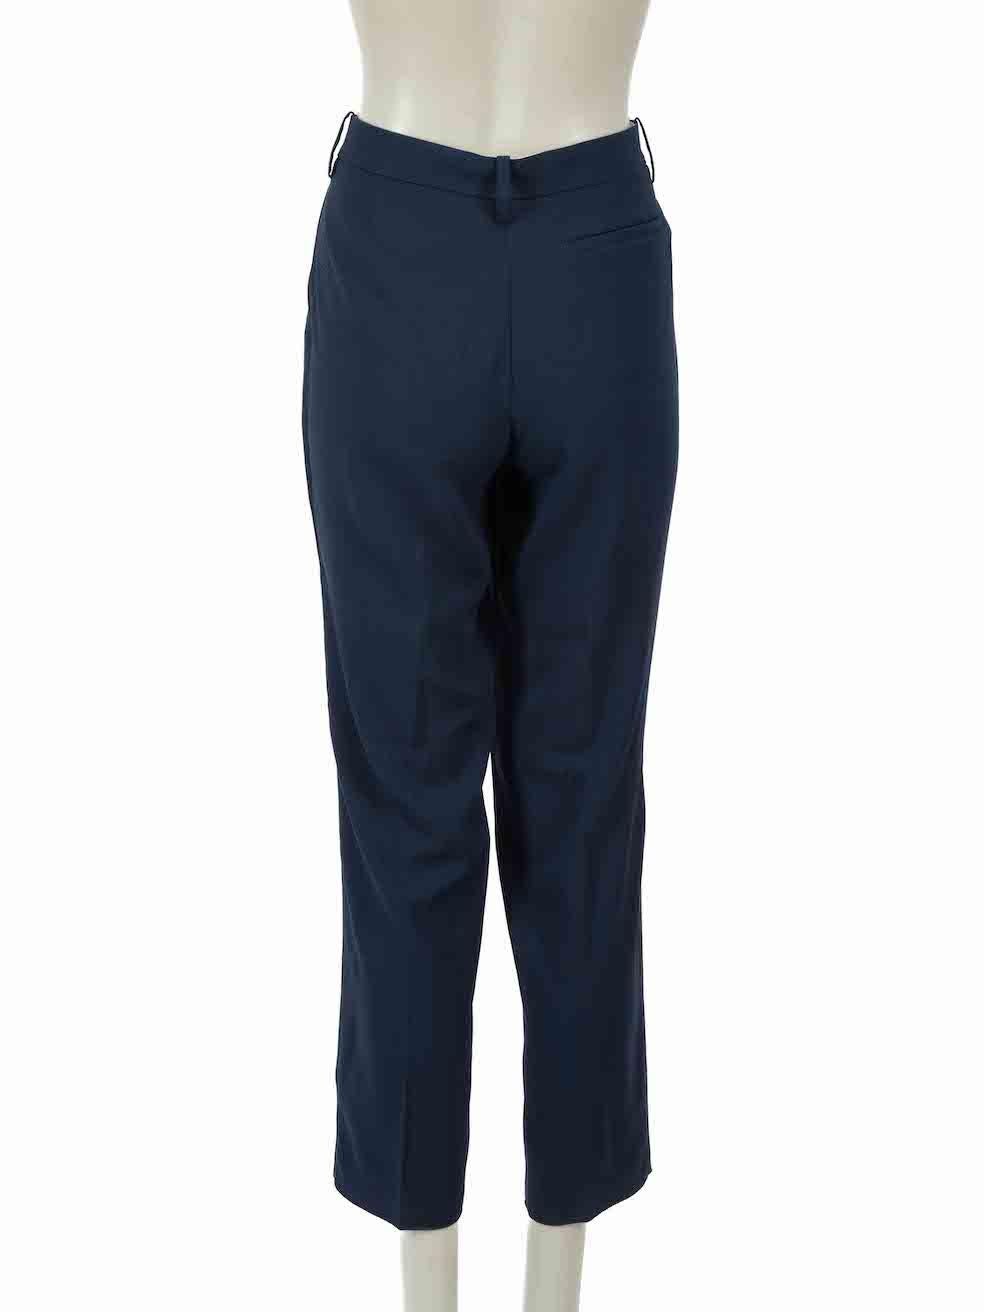 Acne Studios Navy Cora Crepe Slim Leg Trousers Size L In Excellent Condition For Sale In London, GB